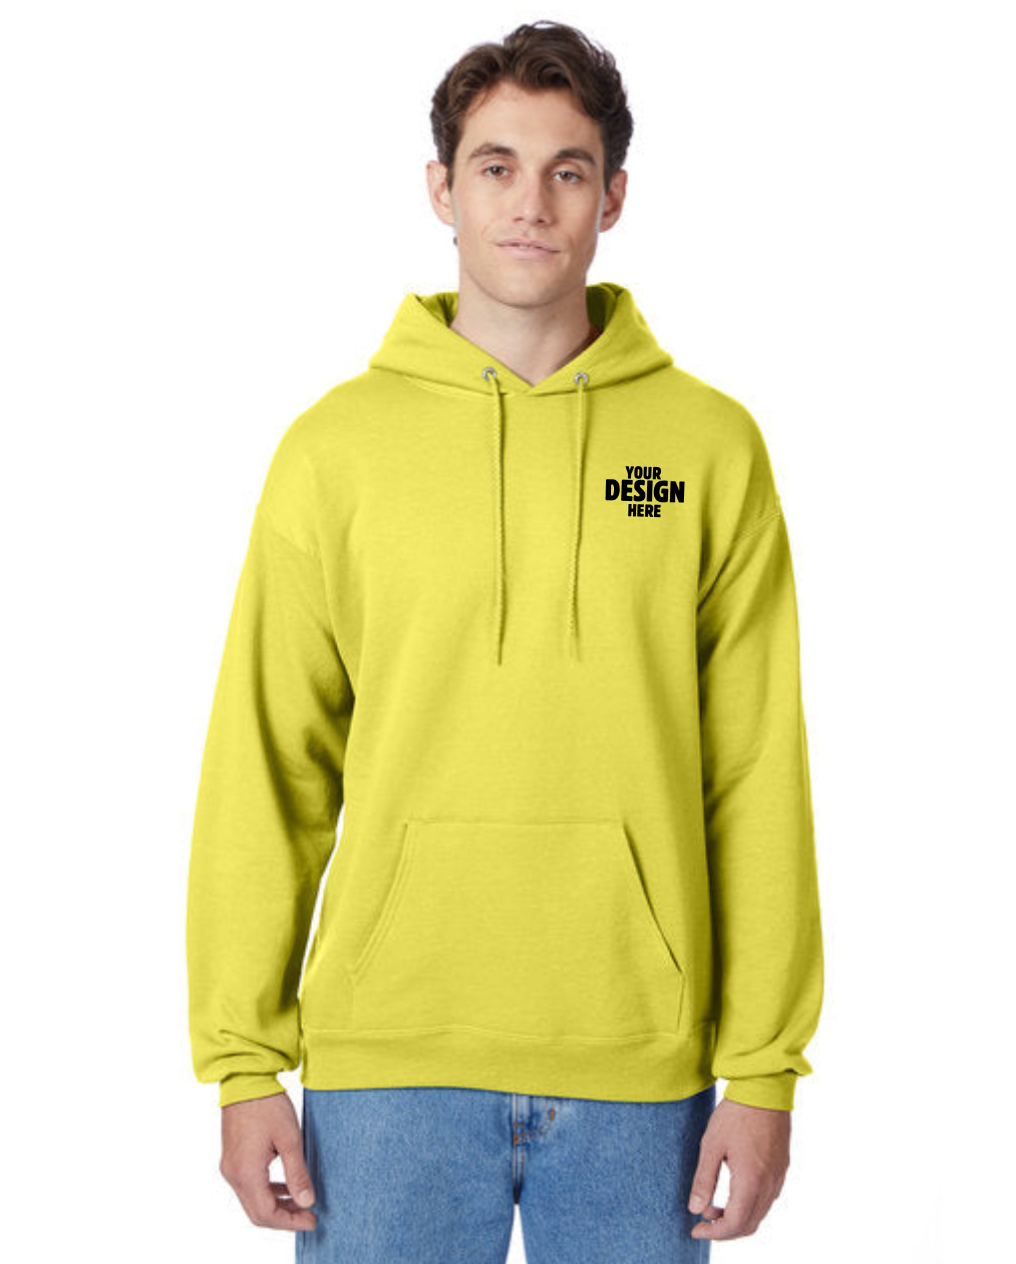 Pullover Hooded Sweatshirt Bright/Neon Colors – New Level Embroidery